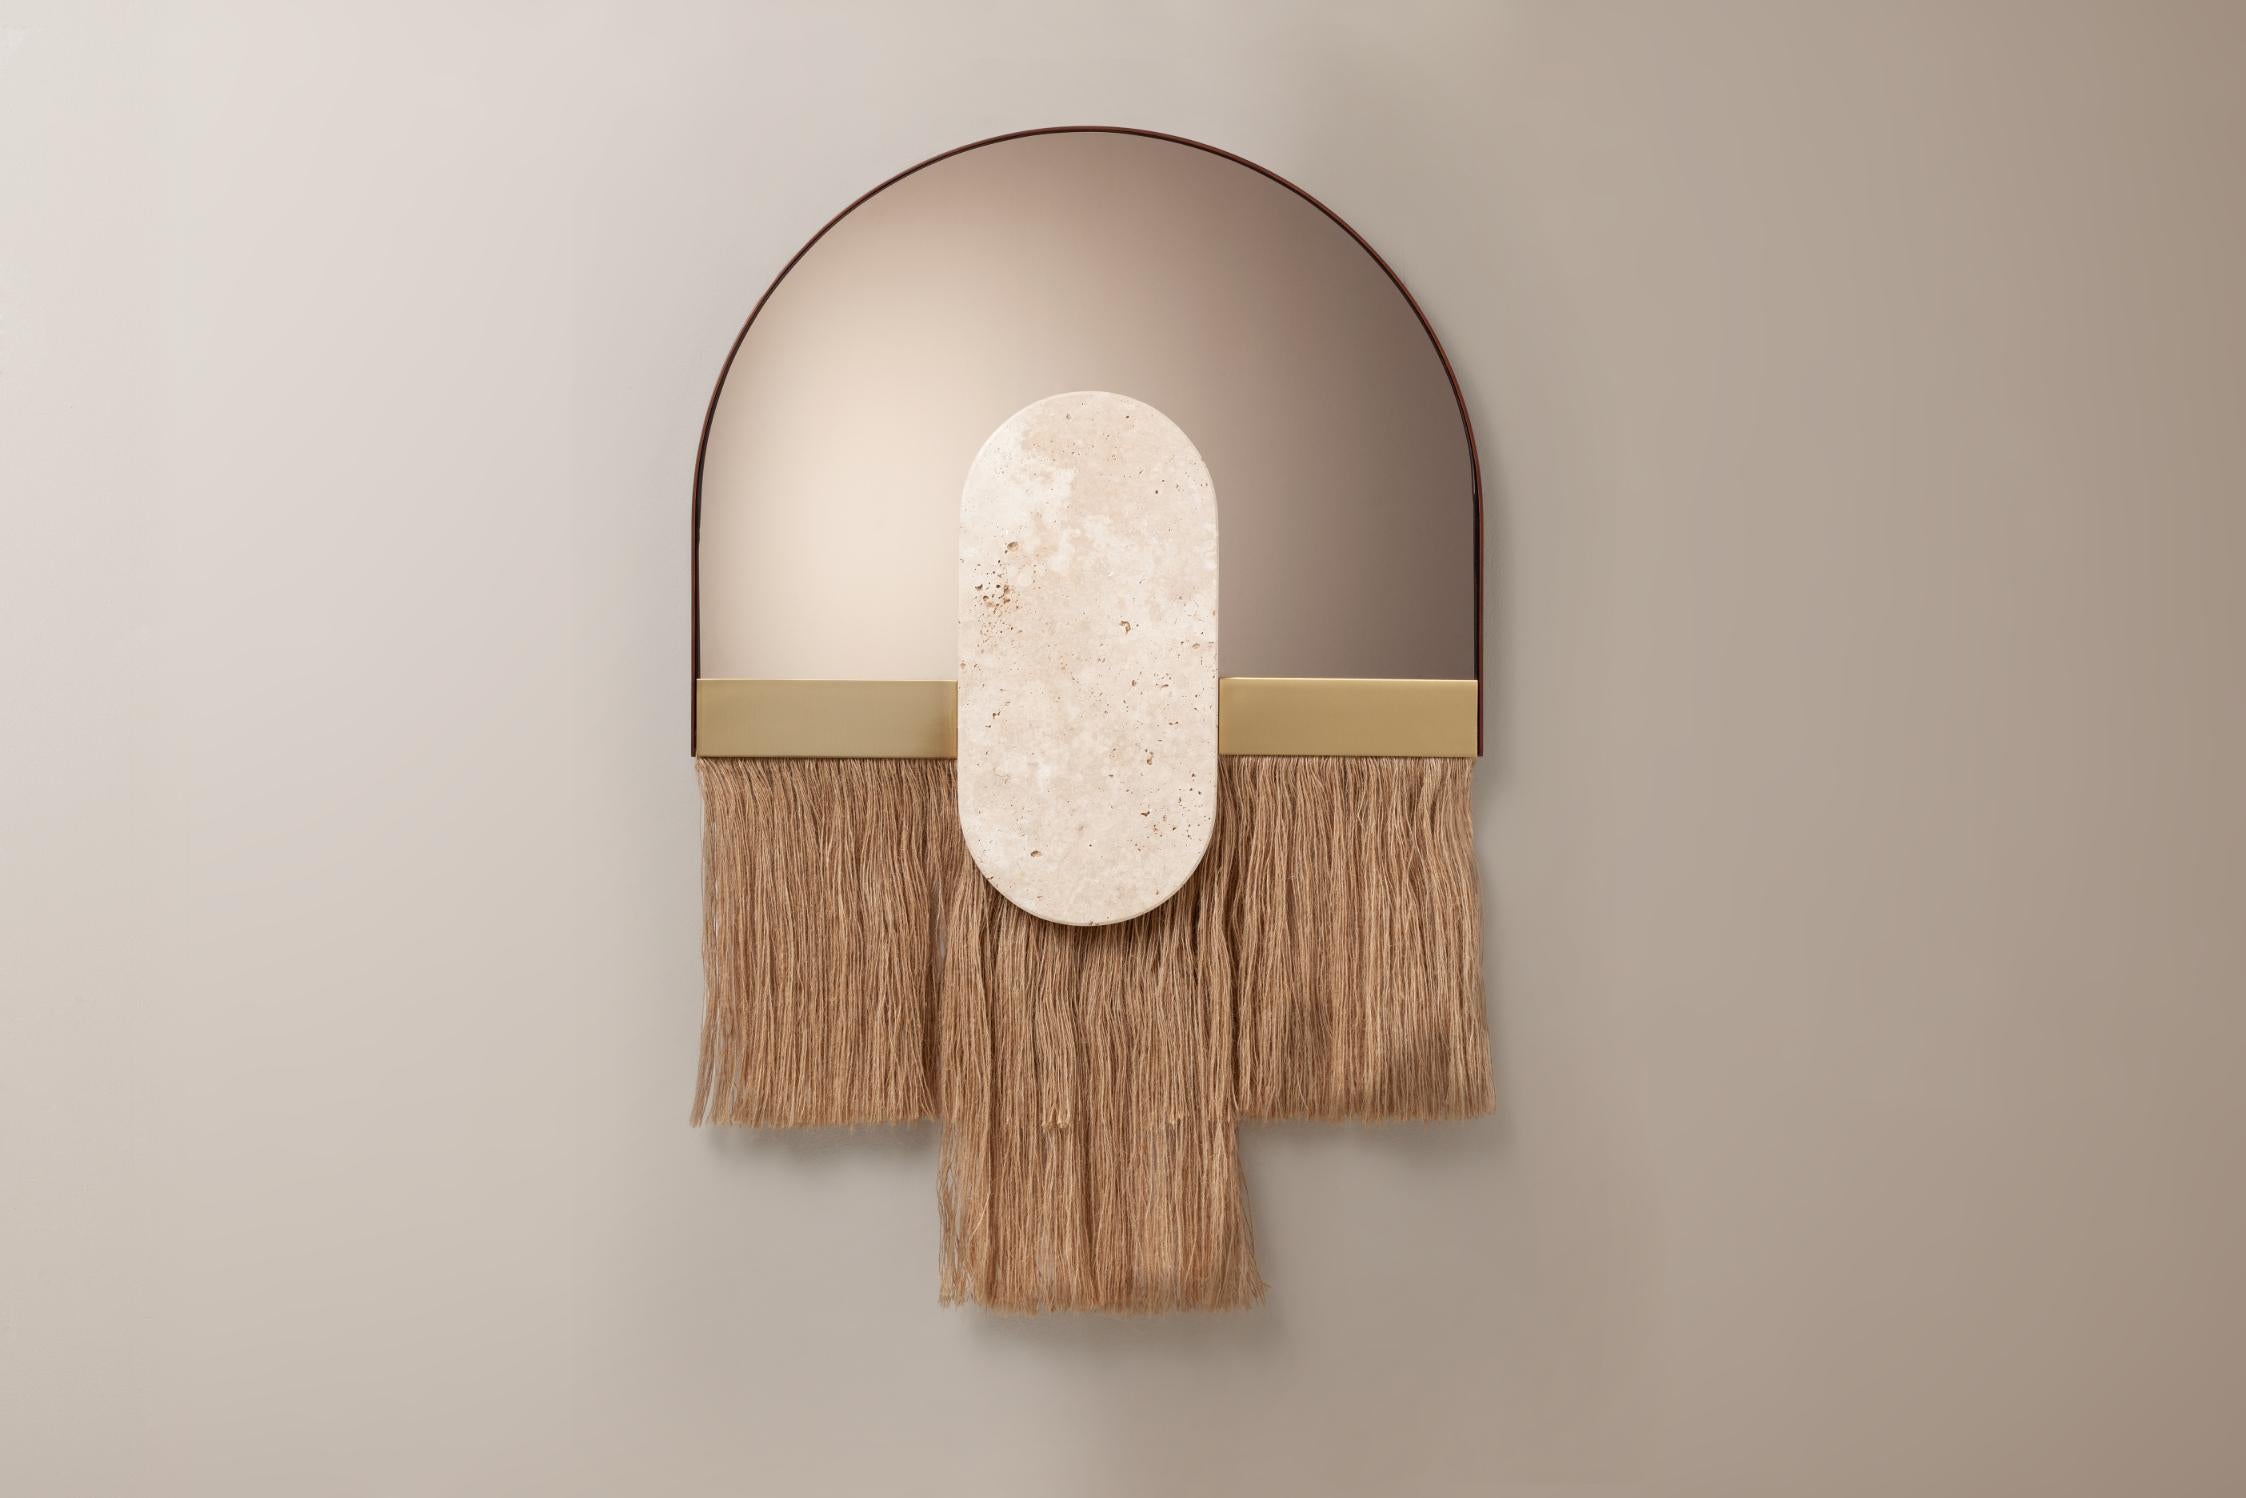 Soul Ecru shell mirror by Dooq
Dimensions: ø 30 x H 40 cm
Materials: Glass, marble.

Created by the perfect combination of color, energy and shape, Souk mirrors reflect the influences of overwhelming and visually fascinating Souk markets in